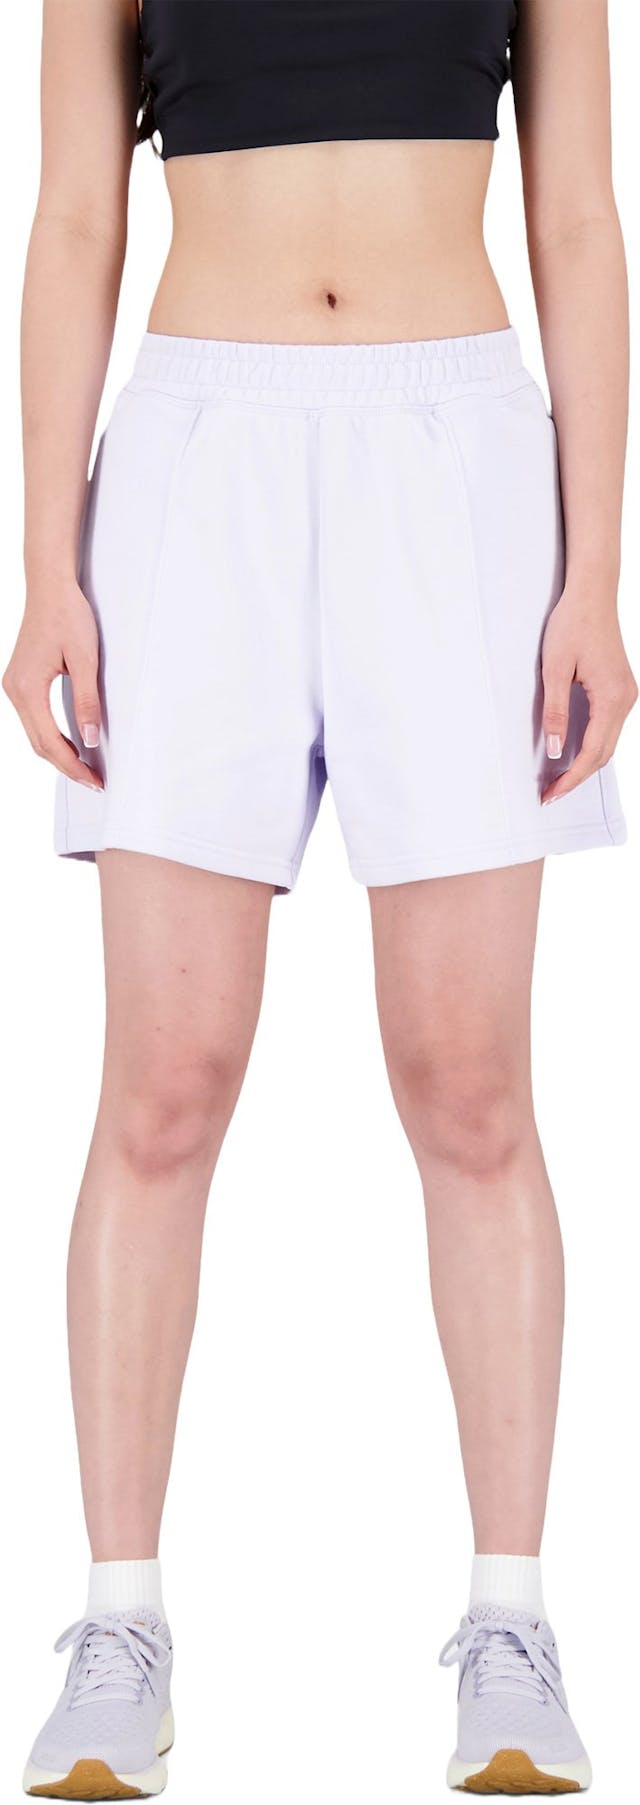 Product image for Nb Athletics Nature State Short - Women's